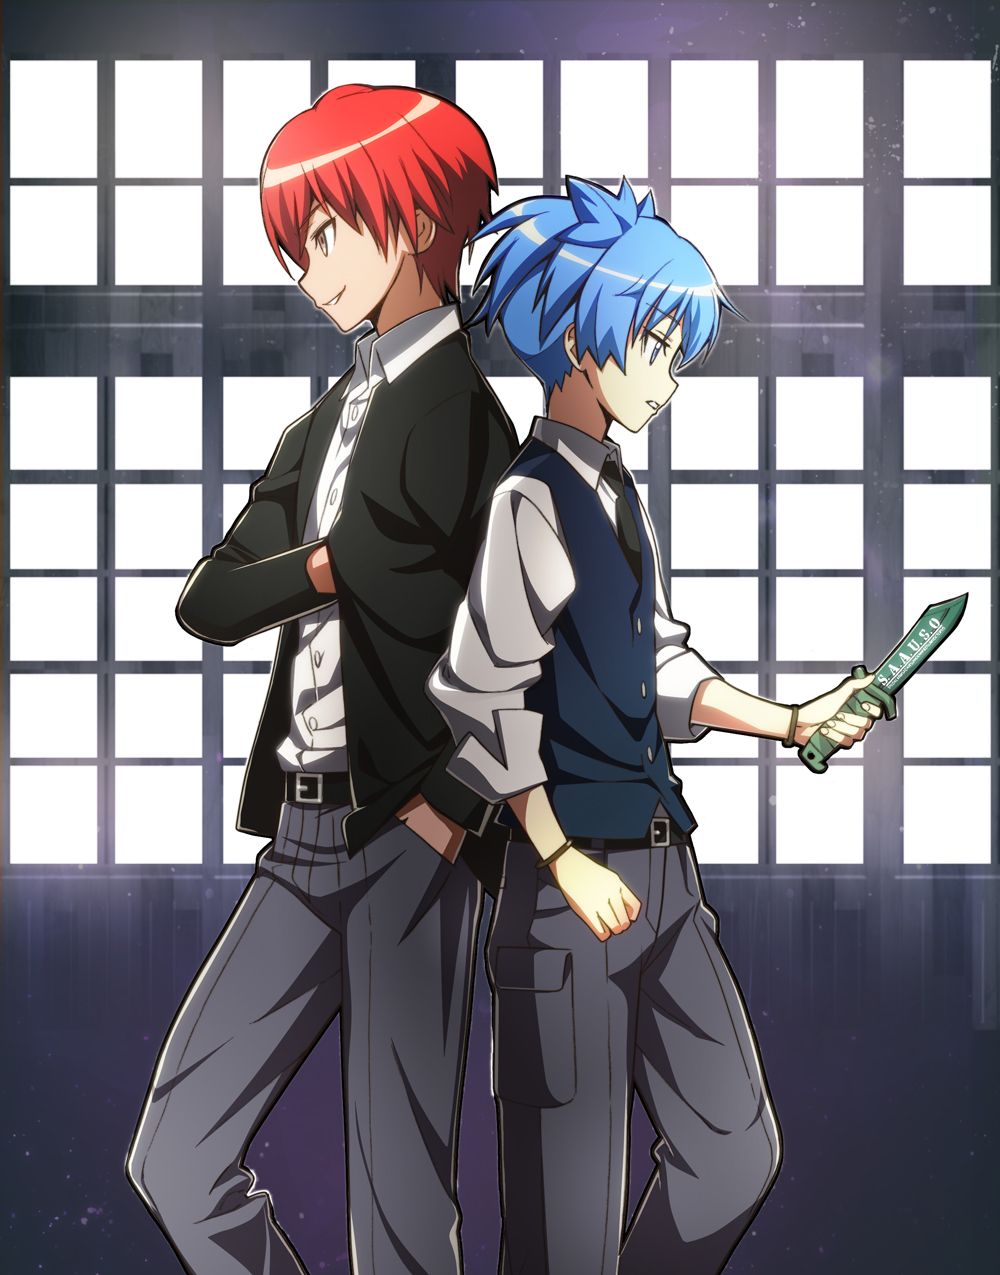 How to Watch Assassination Classroom anime? Easy Watch Order Guide